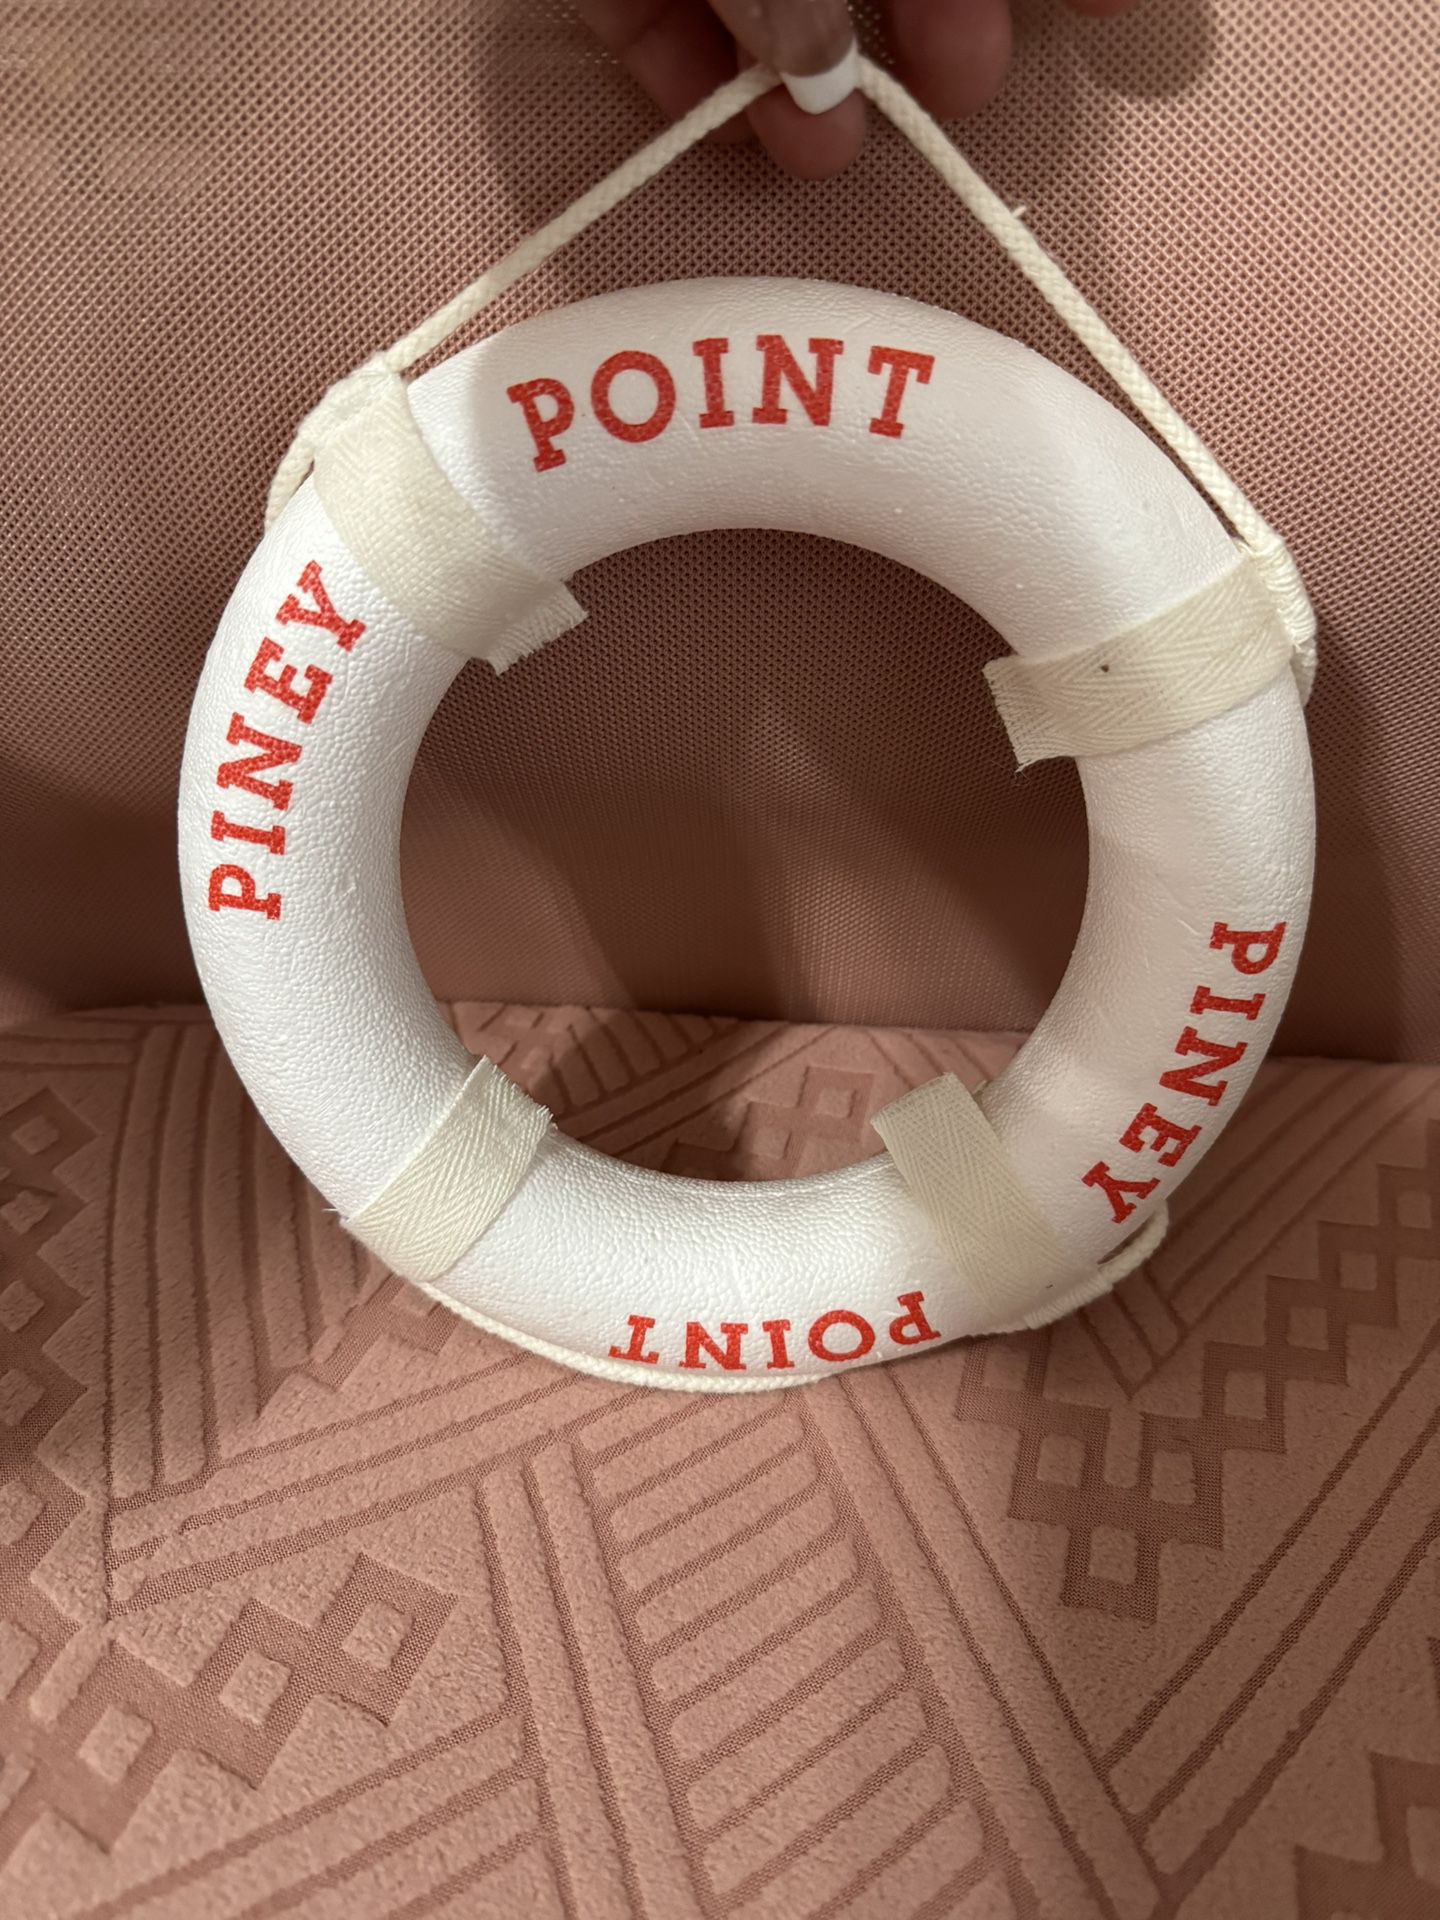 American Girl Samantha’s Piney Point Life preserver For 18” Doll